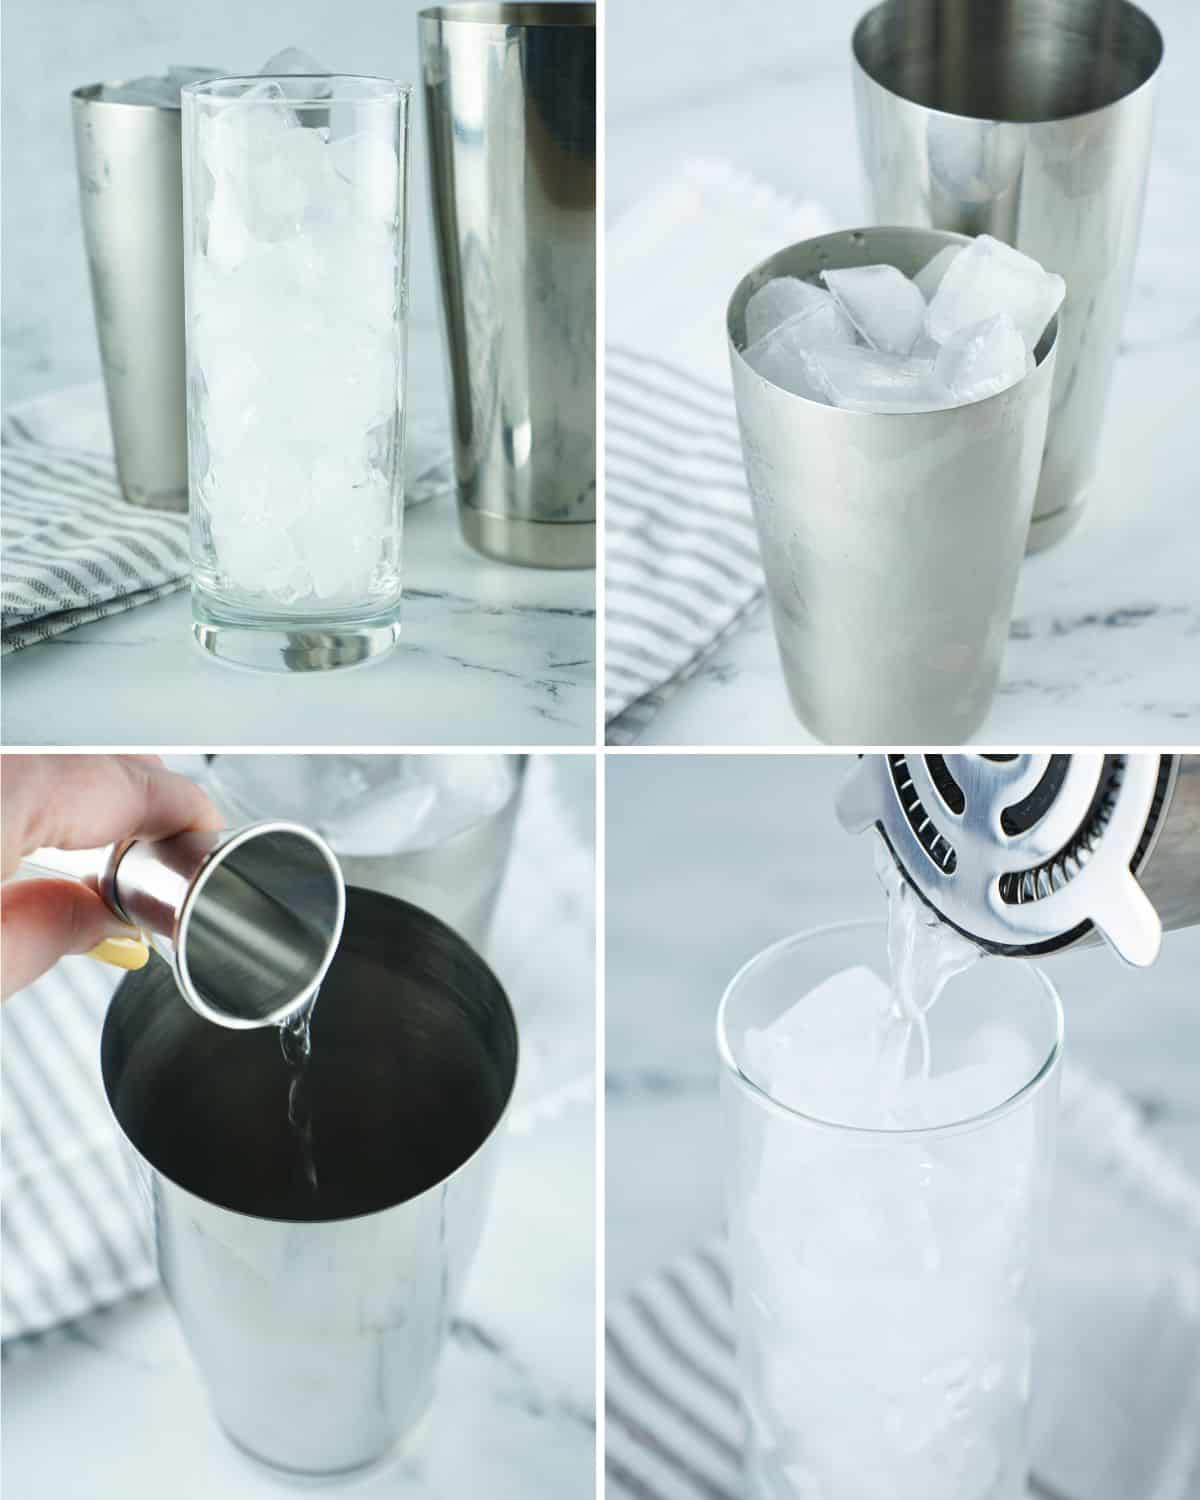 Pictorial steps to make long island iced tea.